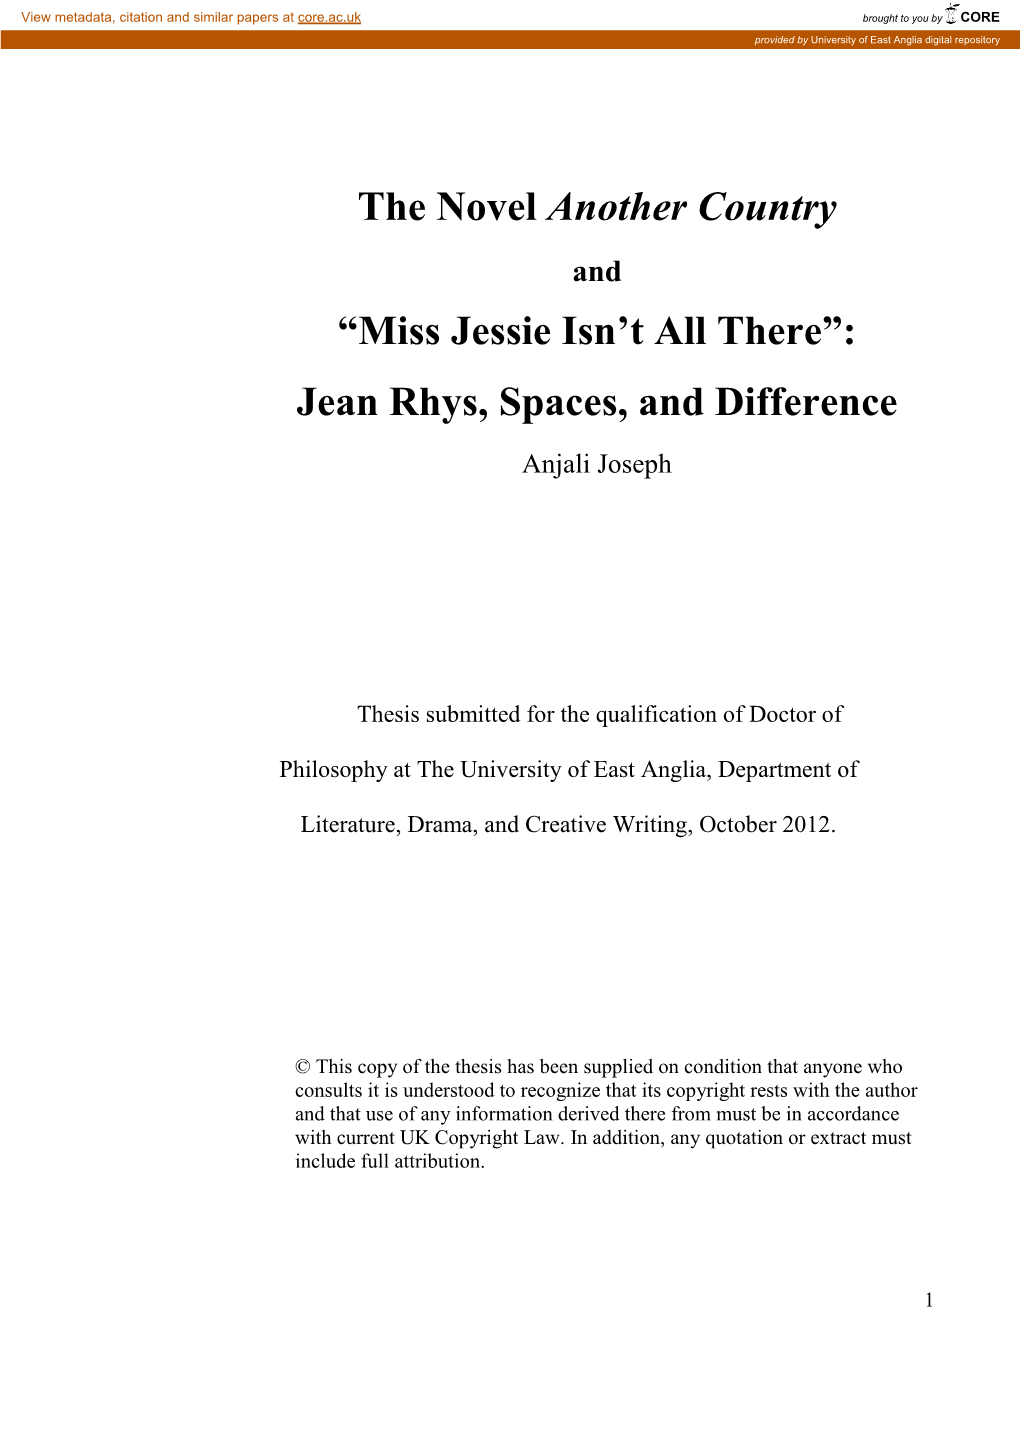 “Miss Jessie Isn't All There”: Jean Rhys, Spaces, and Difference